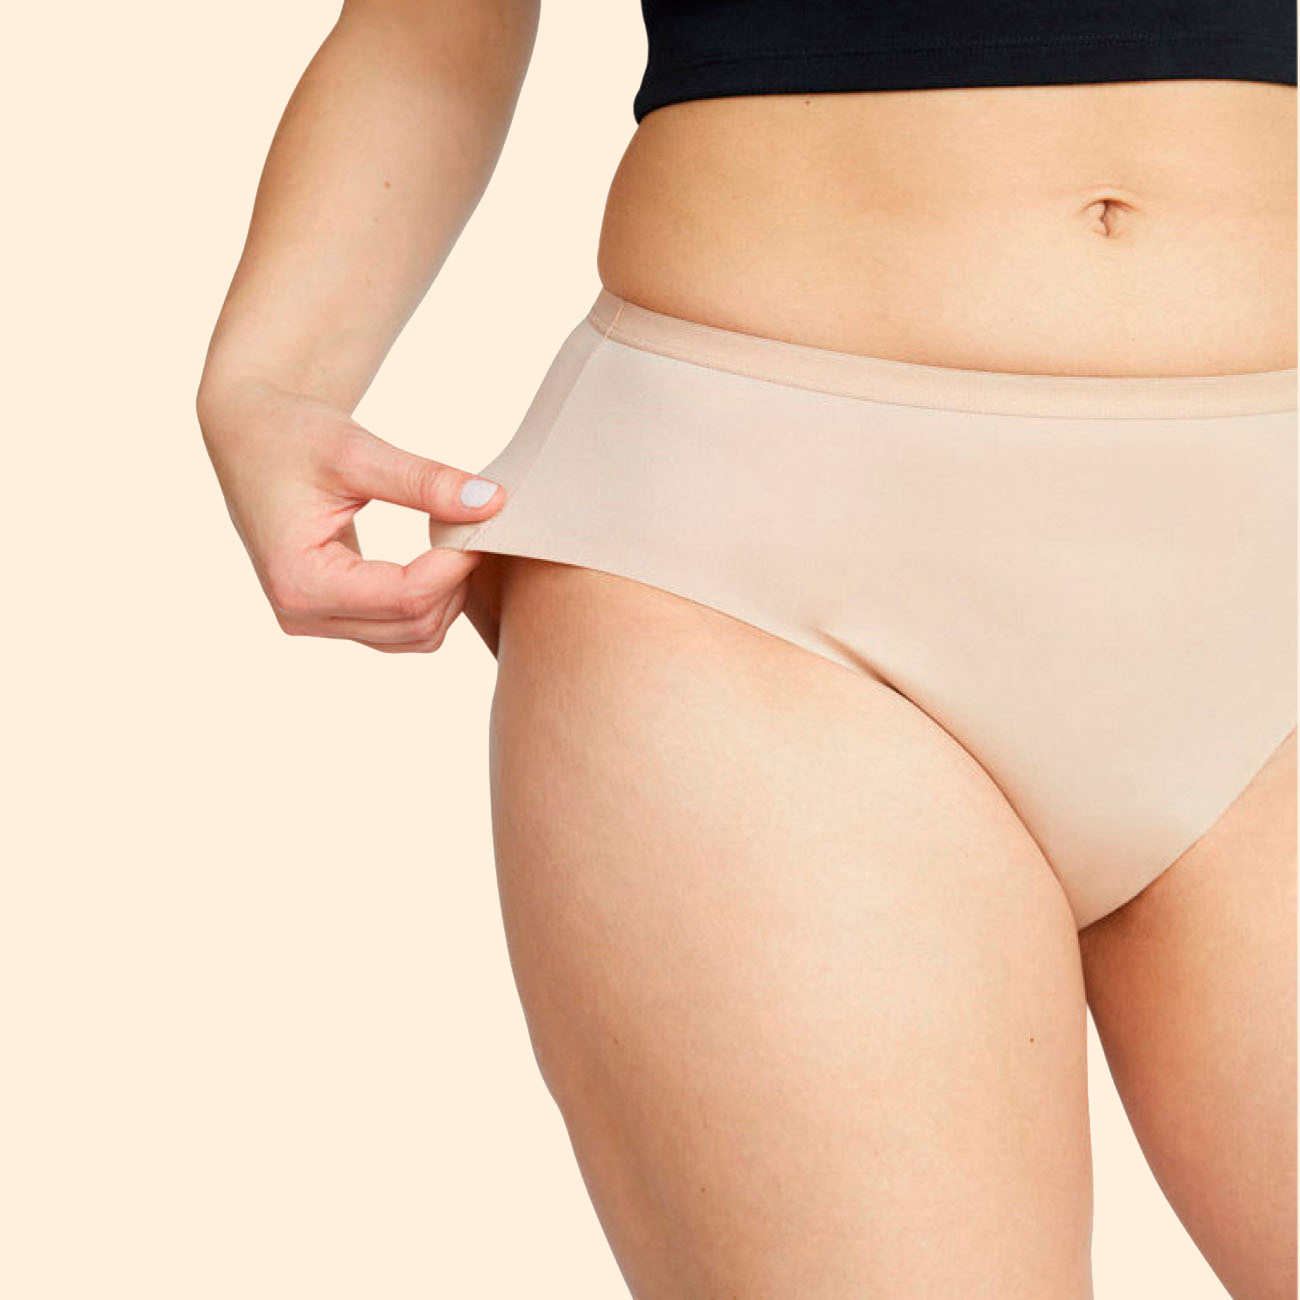 NWT TWO PACK OF SPEAX BY THINX LEAK PROTECTION PANTIES HIPHUGGER